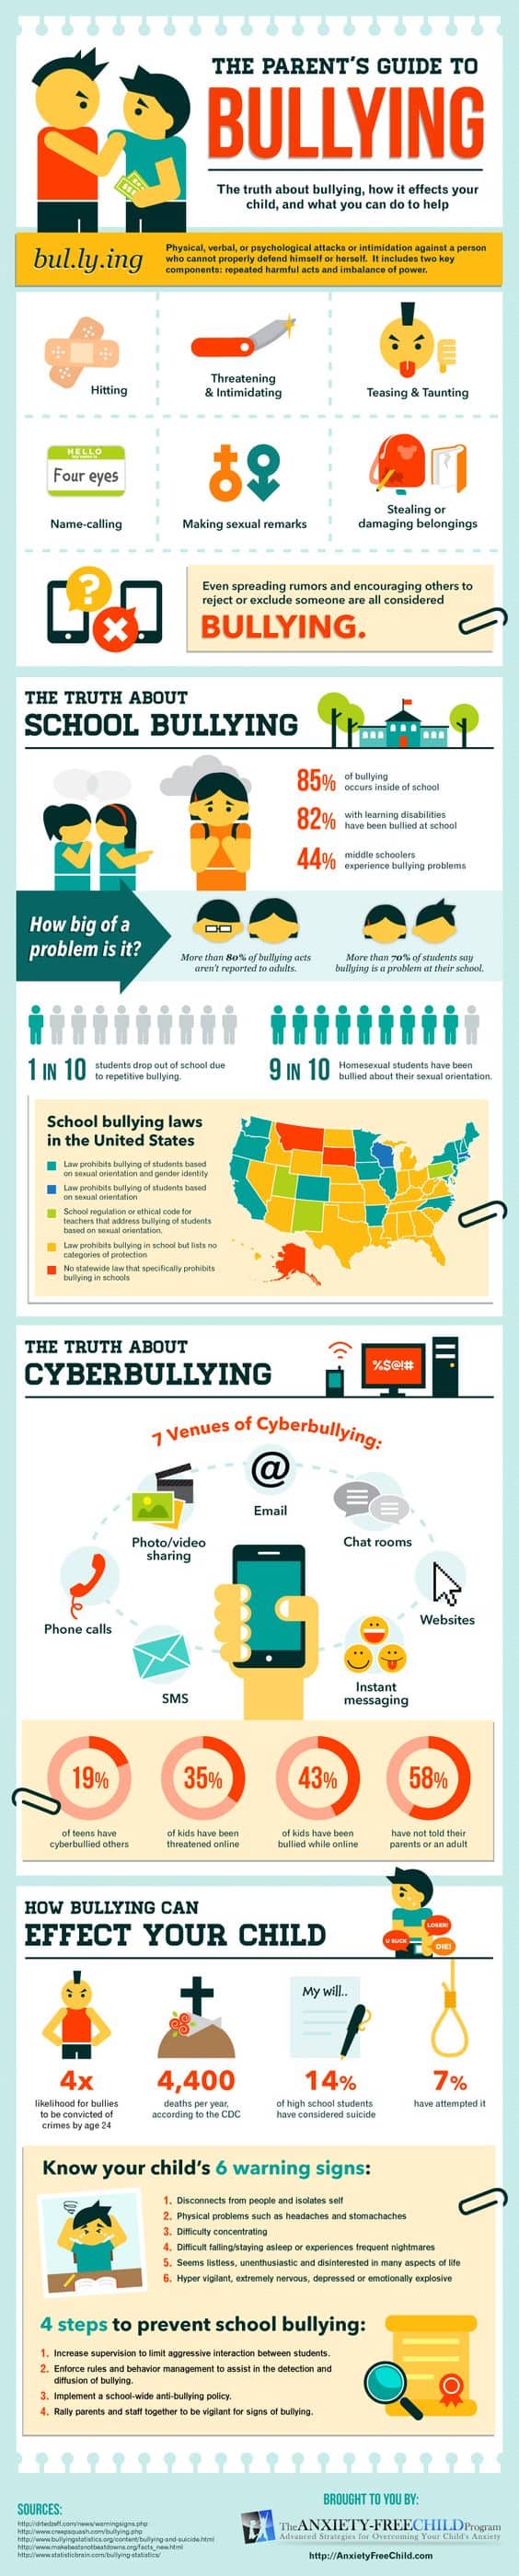 Parents Guide to Bullying and Cyberbullying